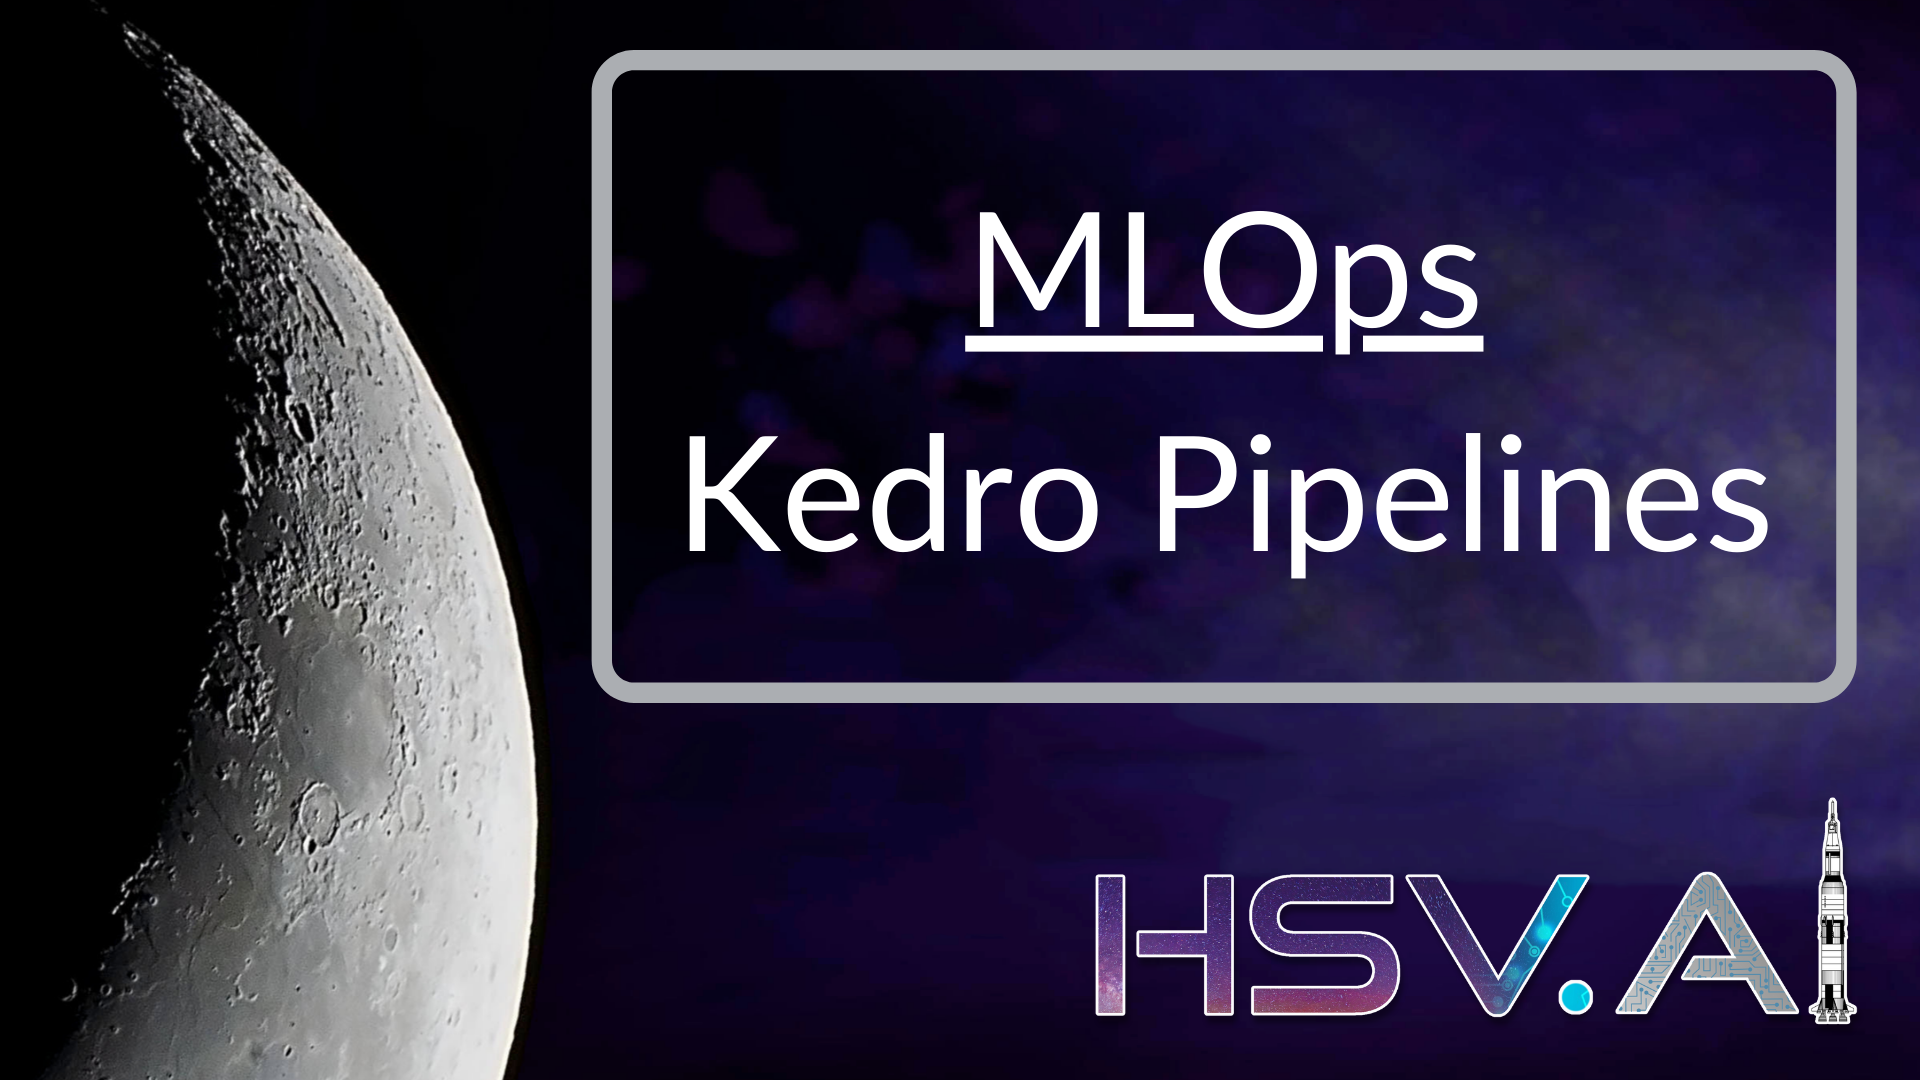 Continuing MLOps with Kedro Pipelines